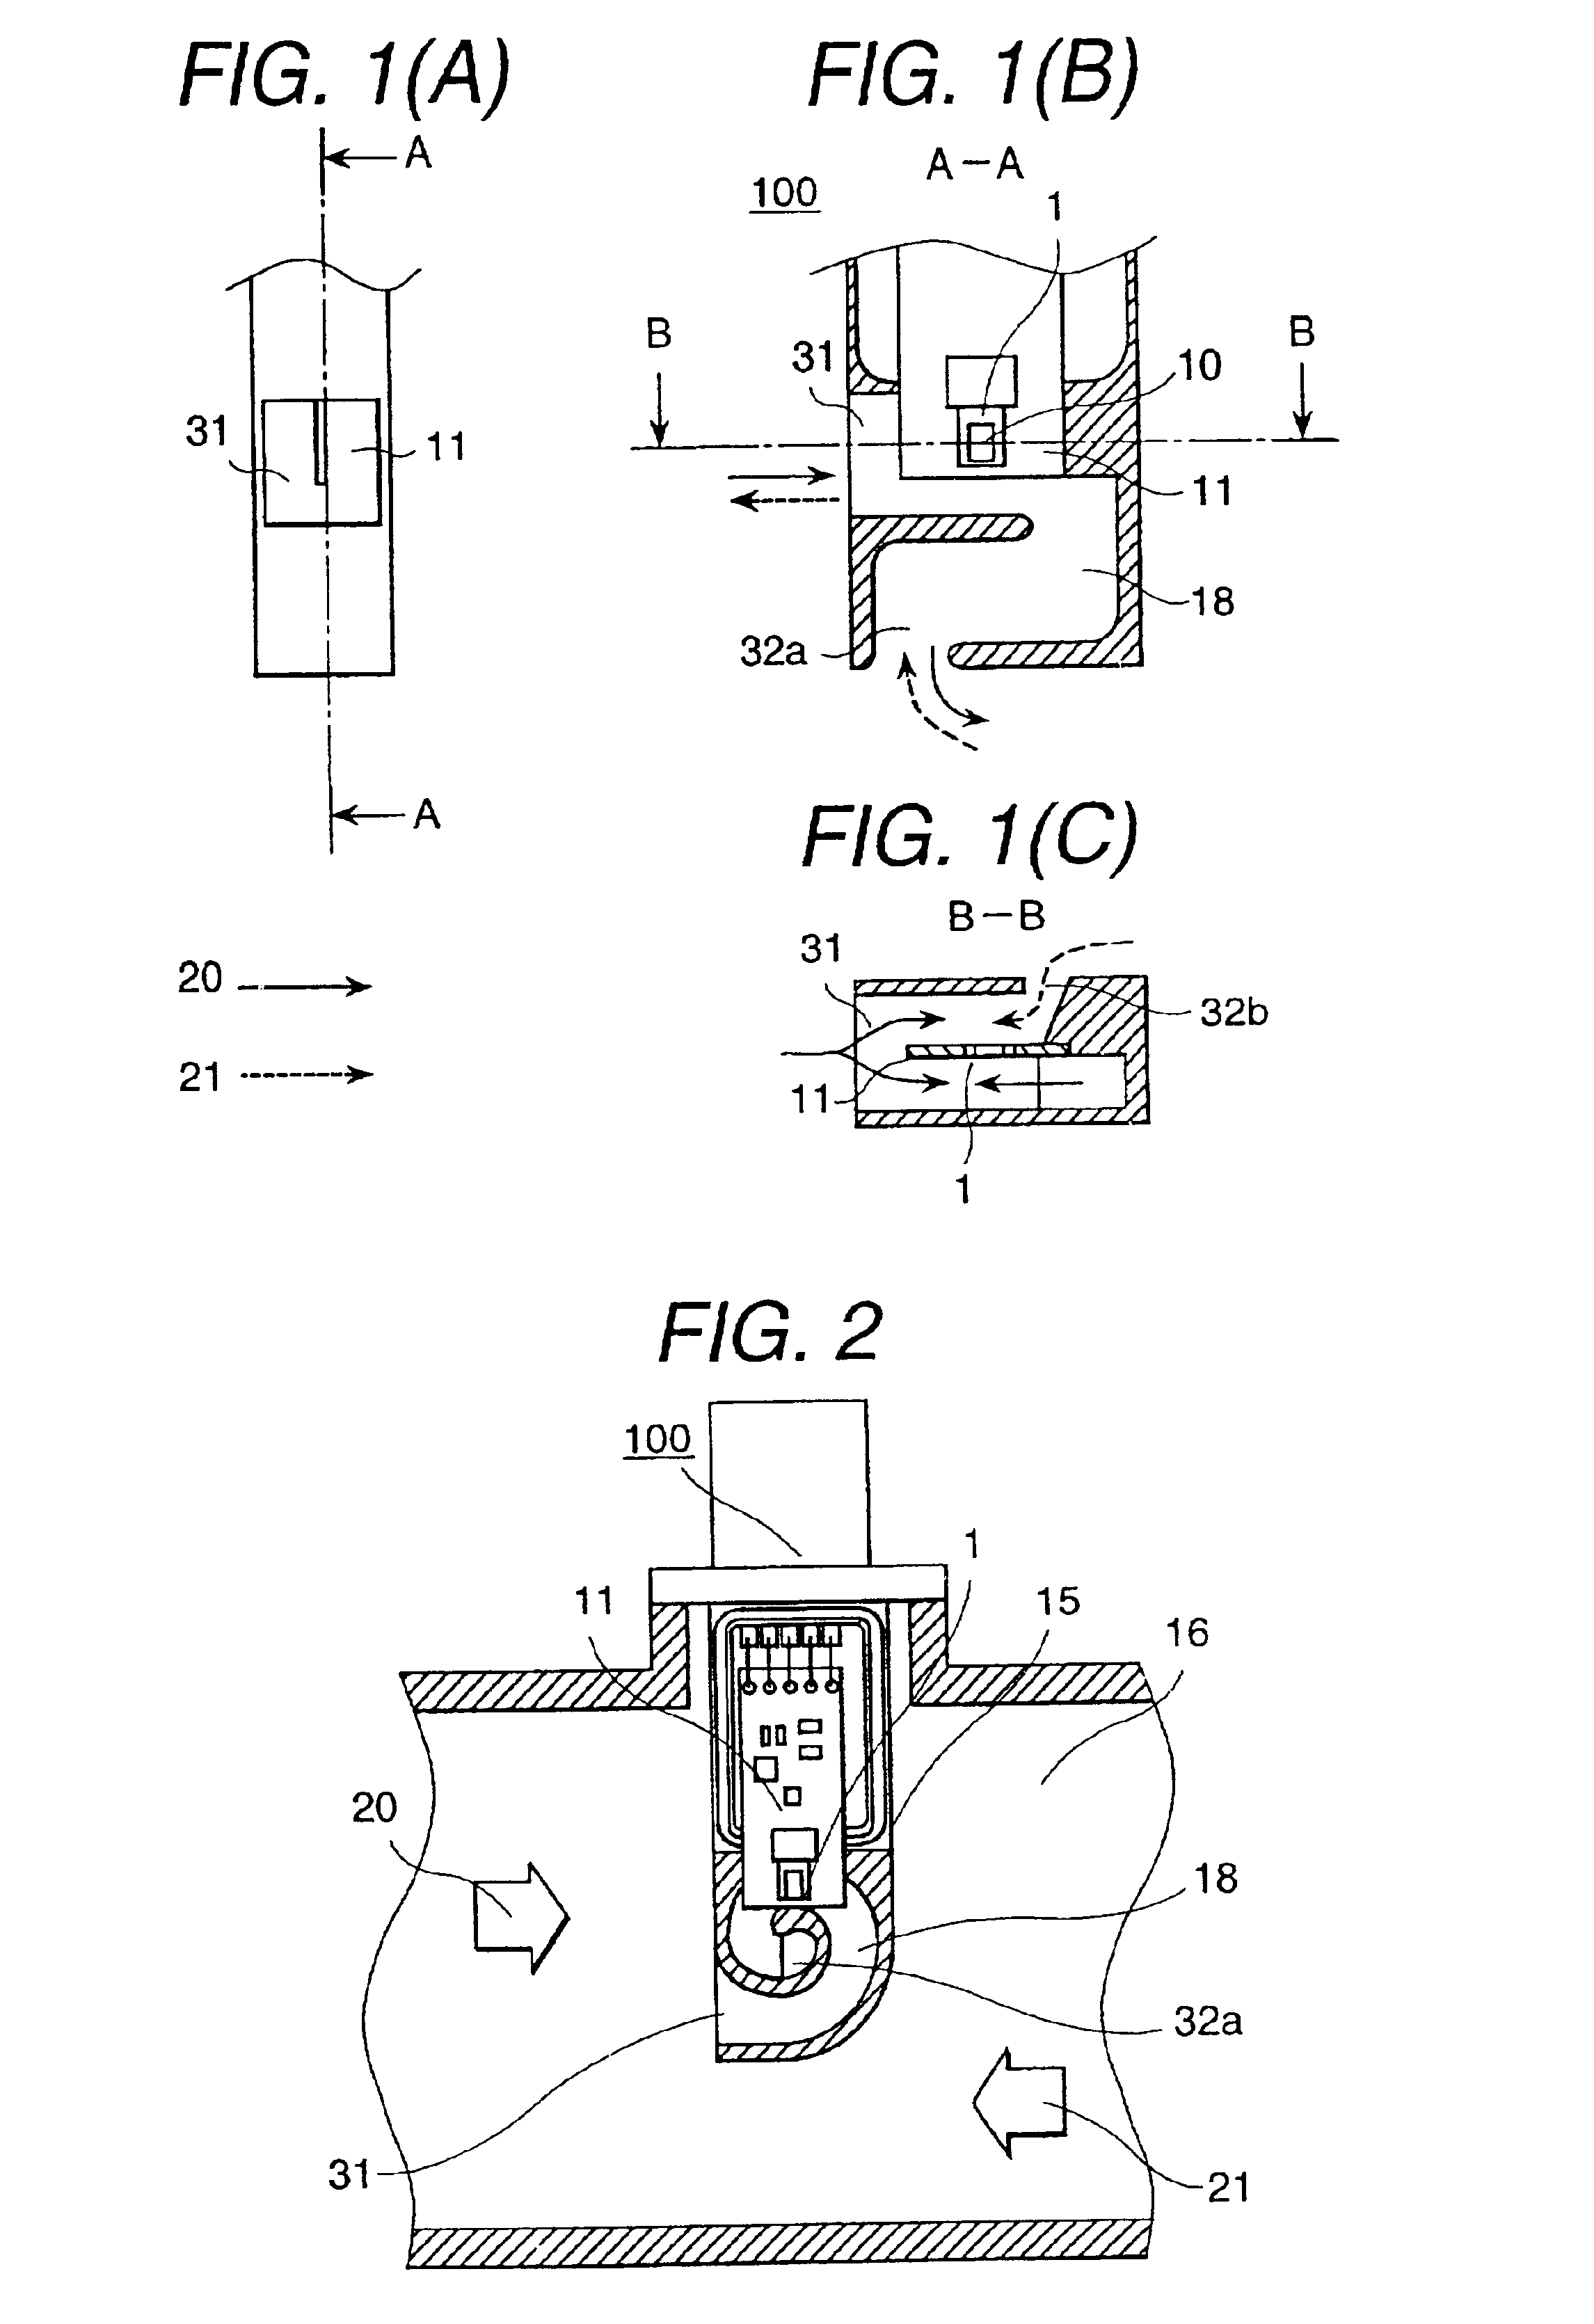 Thermal-type flow meter with bypass passage